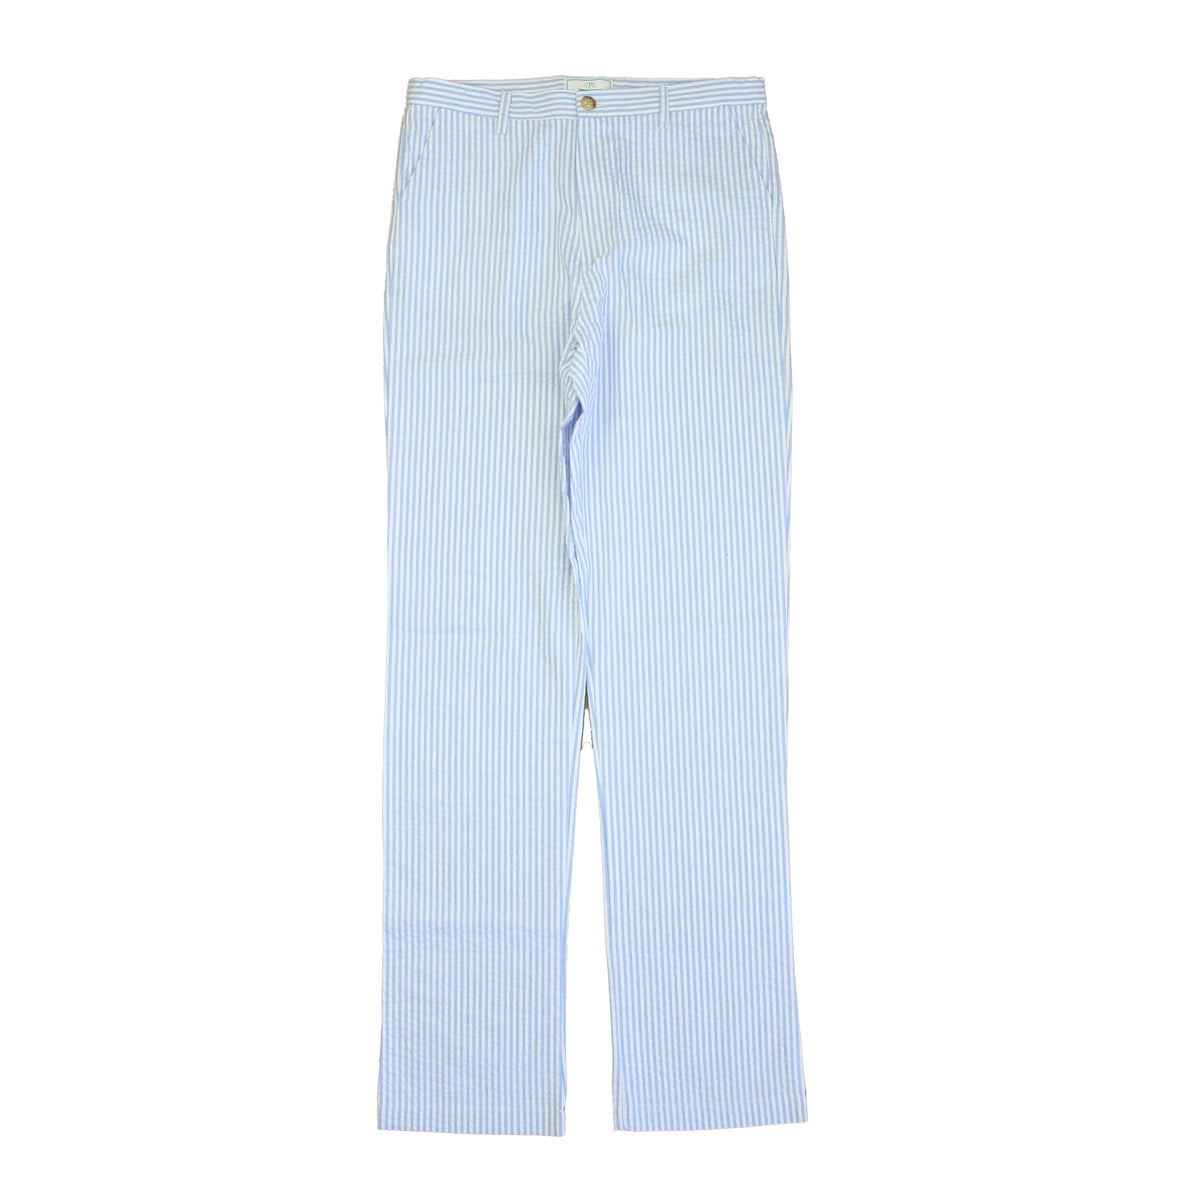 New with Tags: Blue Seersucker Pants size: 6-14 Years -- FINAL SALE